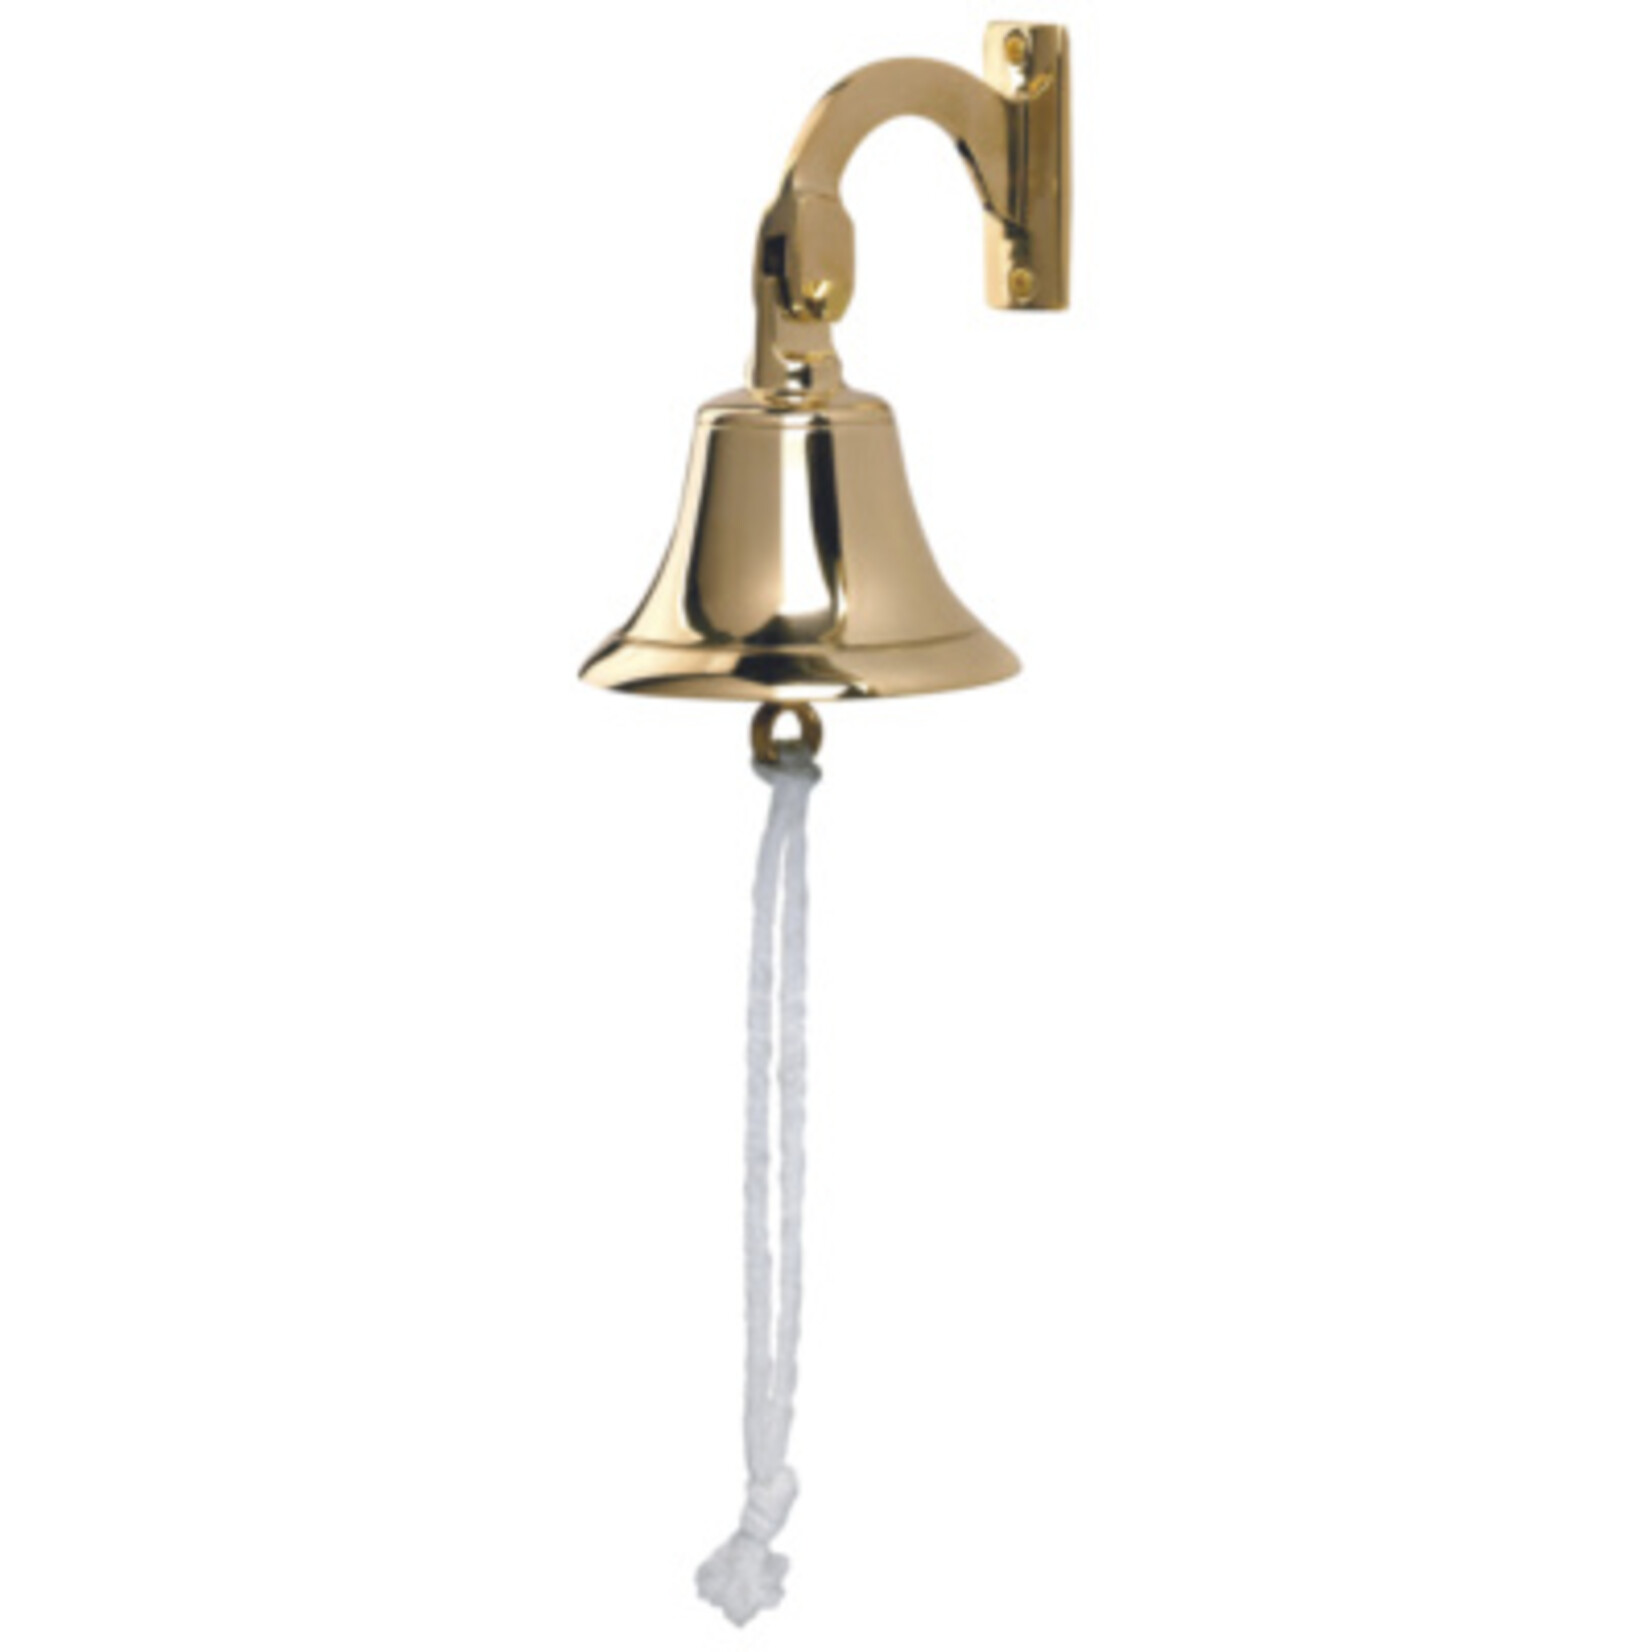 Plastimo Bell dia 90mm, brass polished